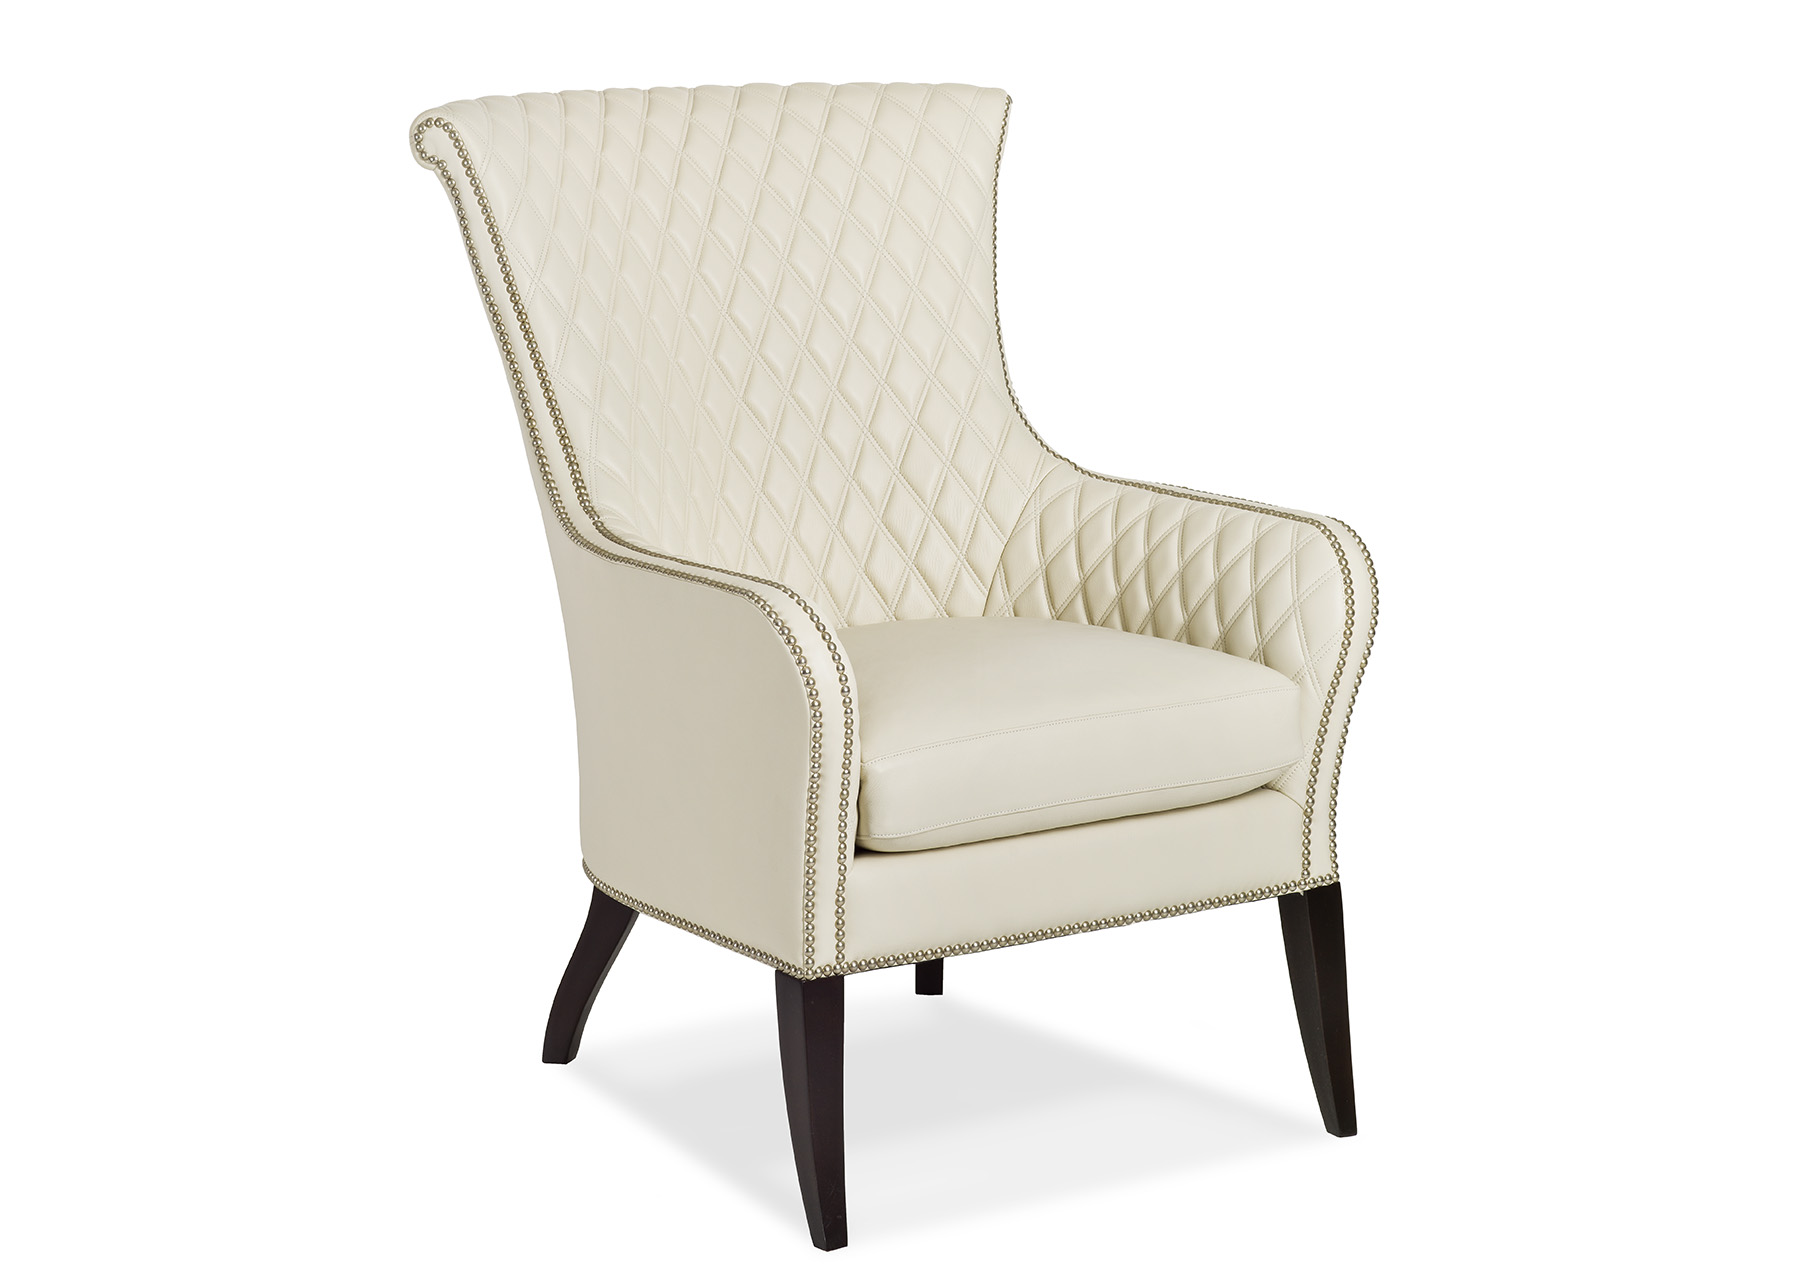 EVIE QUILTED CHAIR